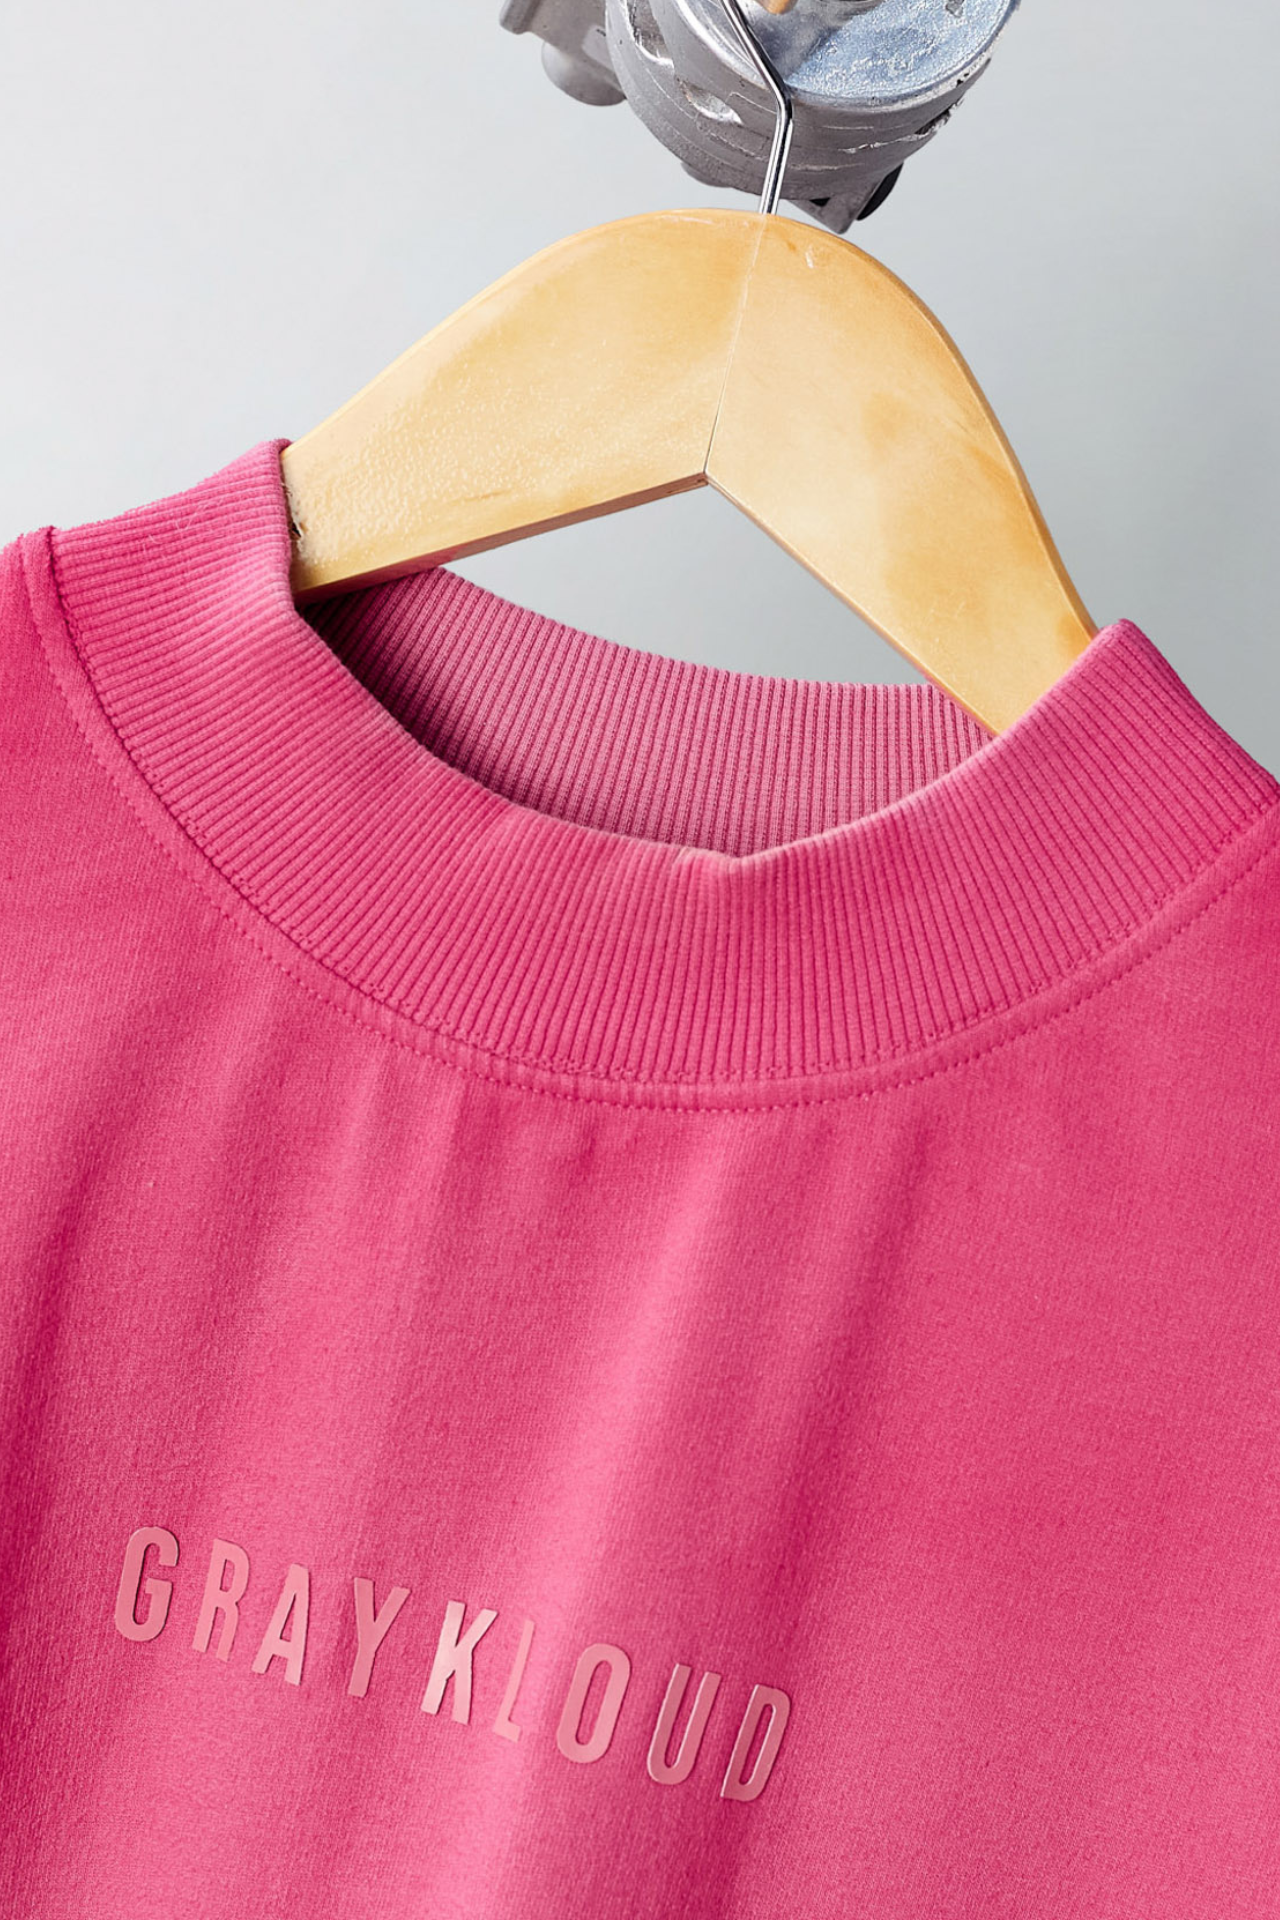 Handcrafted Pink Ombre T-shirt